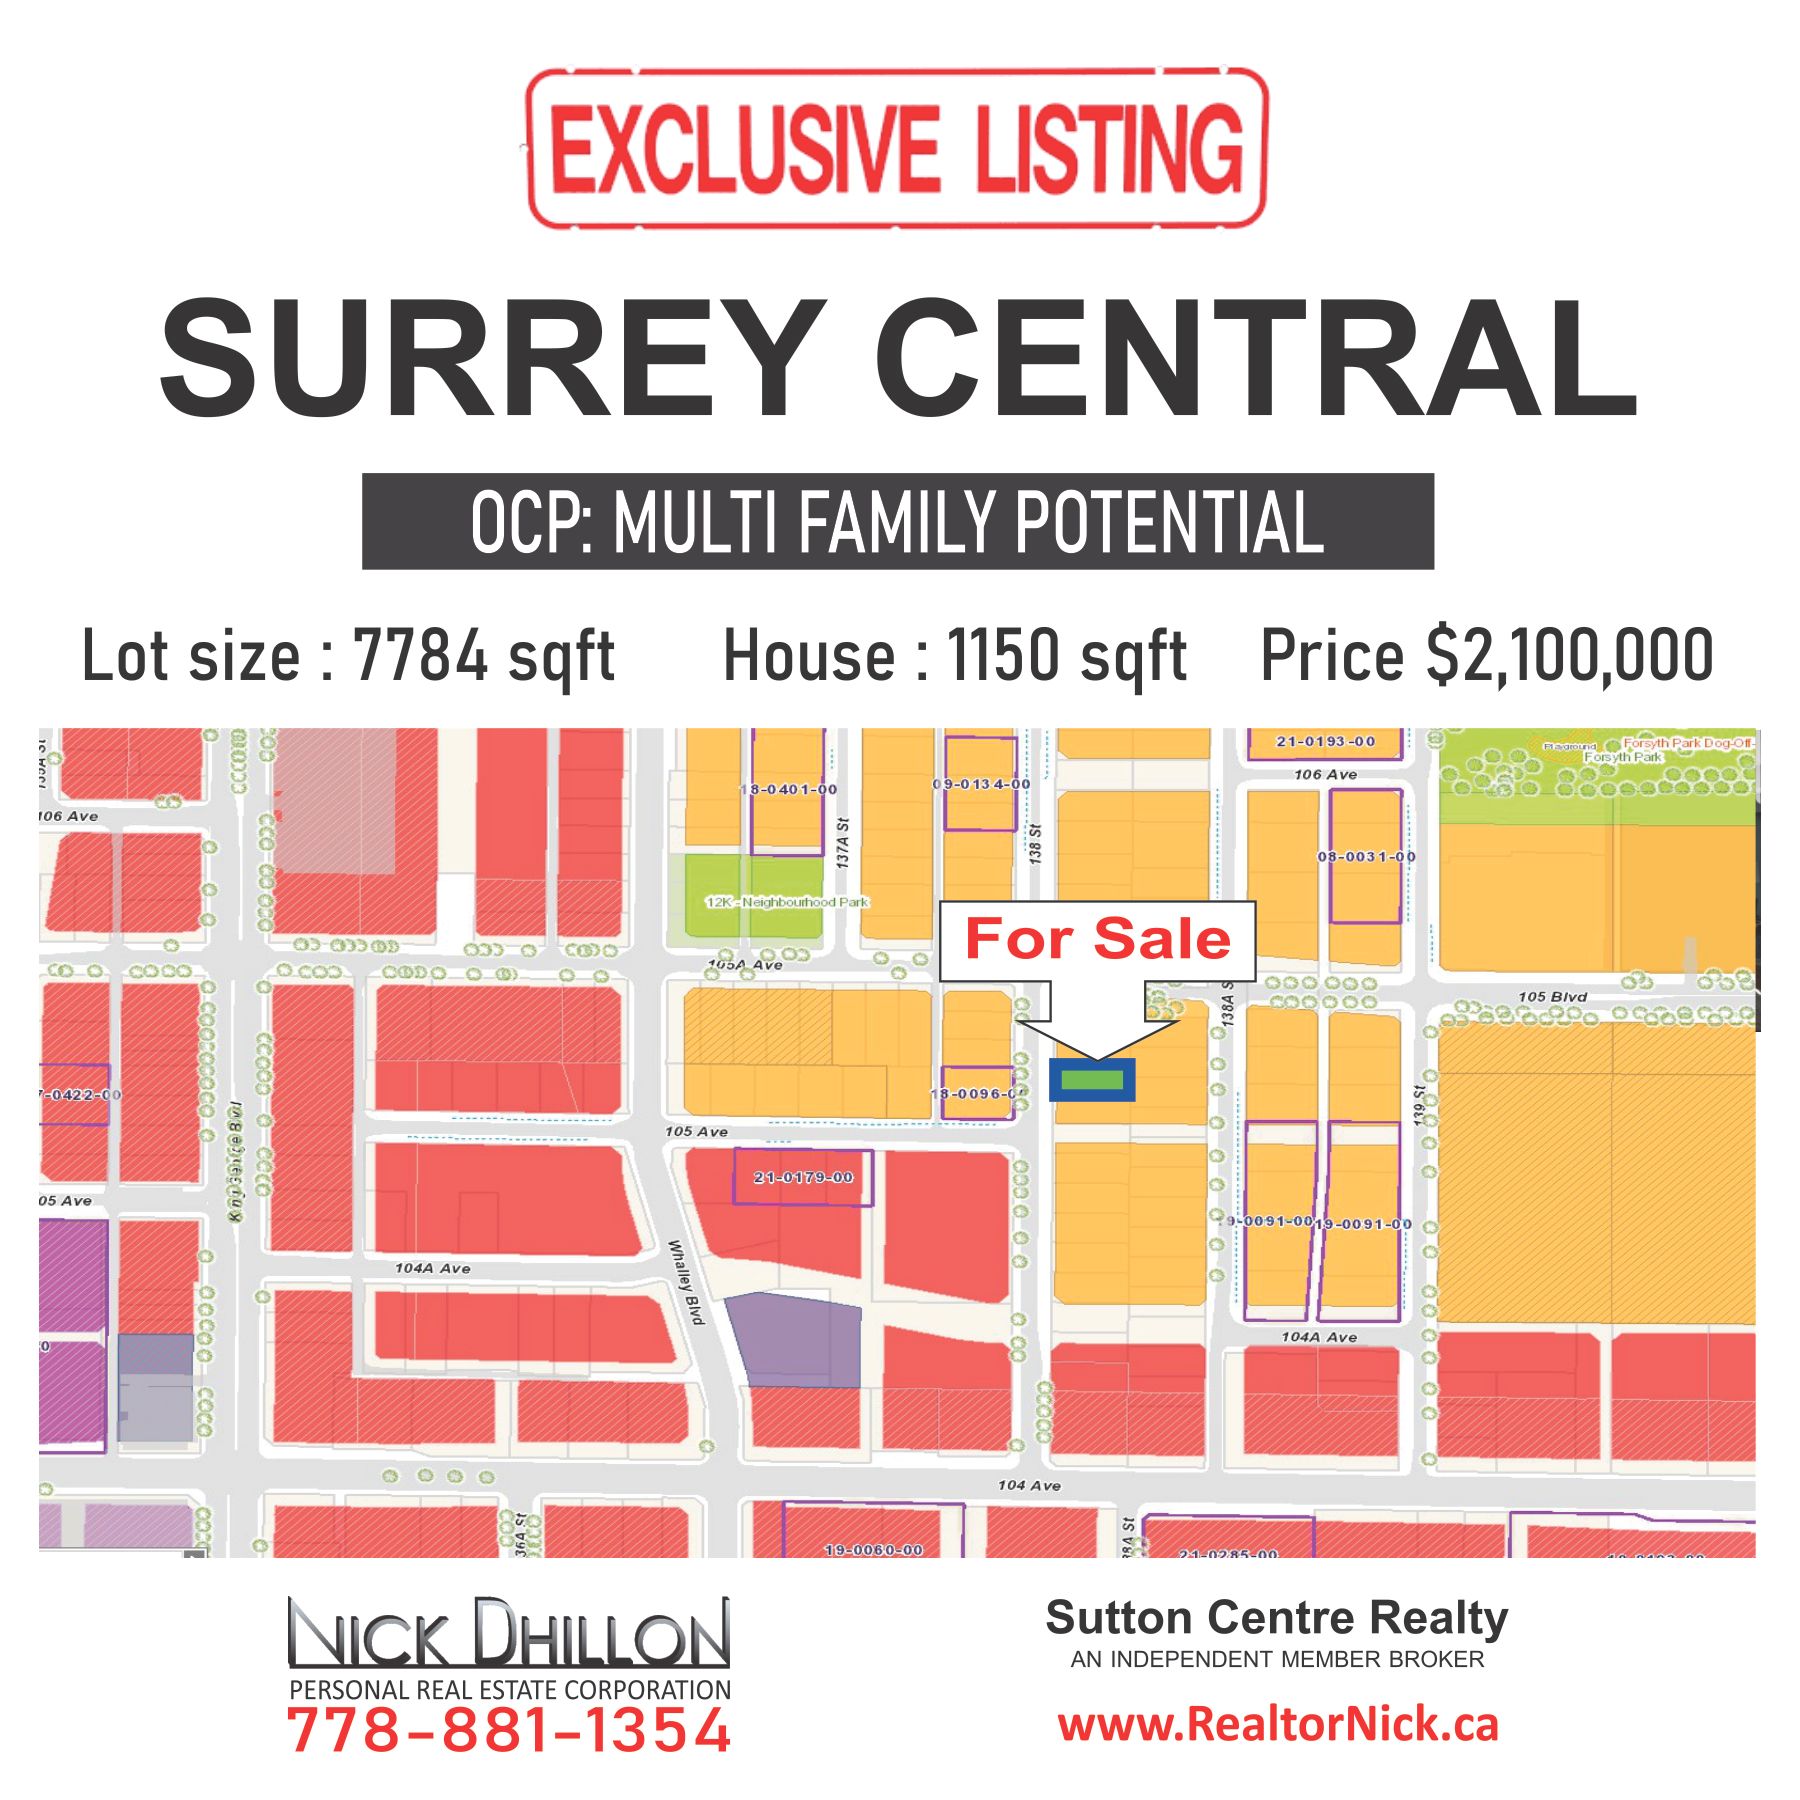 Main Photo: 138 st 105 Ave in Surrey: Central House for sale